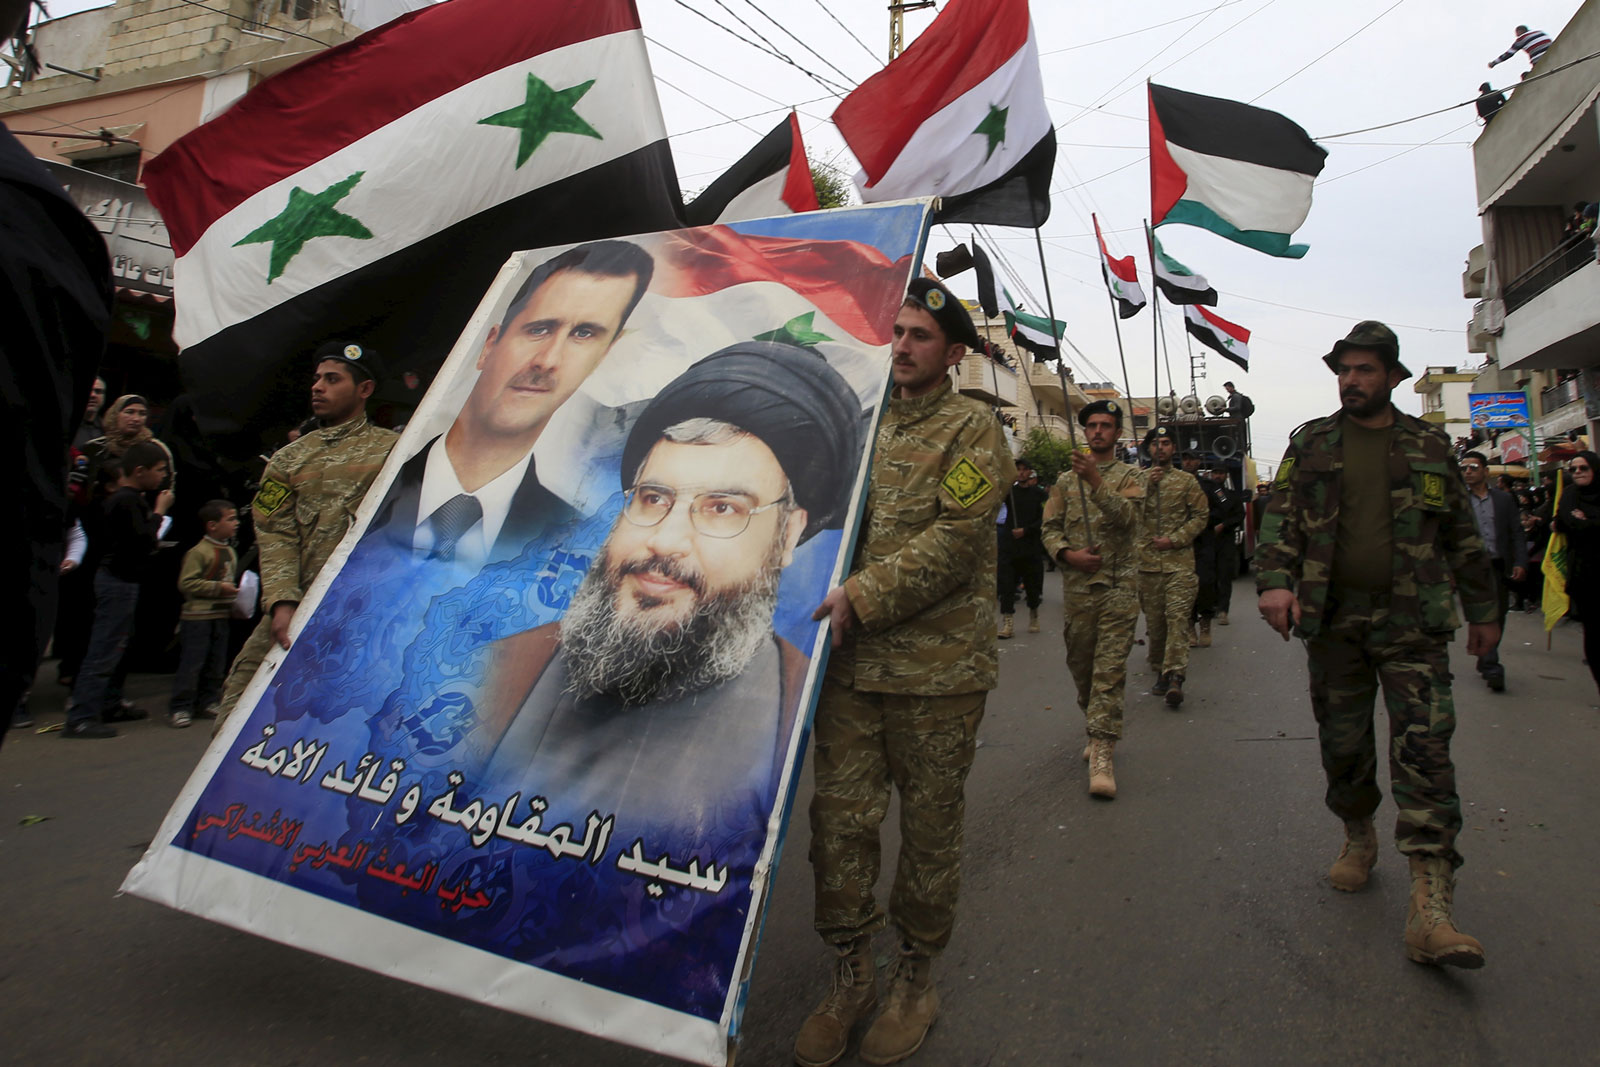 Supporters of the Syrian regime carrying a poster of Bashar al-Assad and Sayyed Hassan Nasrallah, the leader of Iran-backed Hezbollah, Ansar village, Lebanon, March 2, 2016